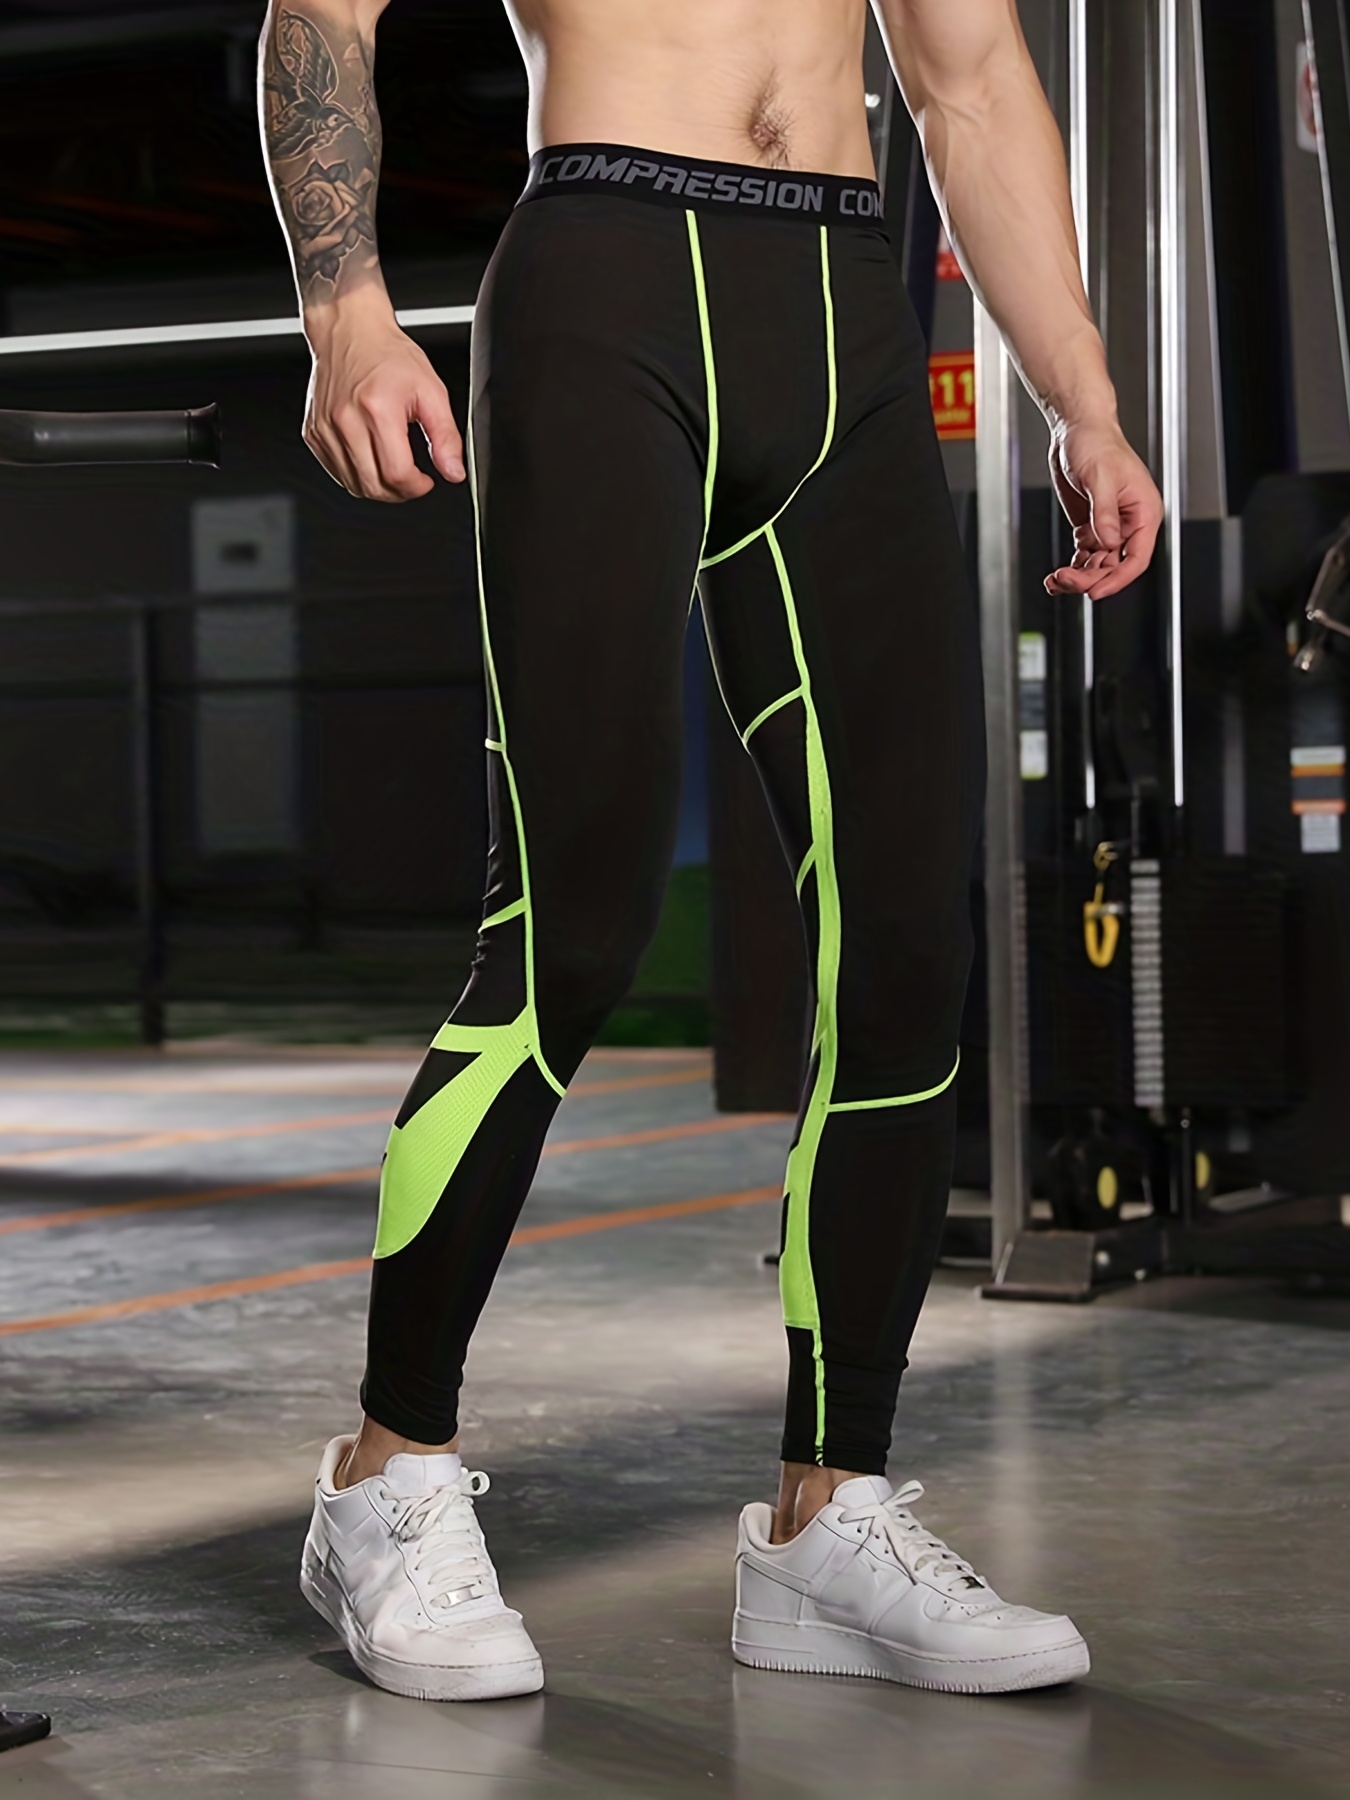 Custom Tights and Compression Pants